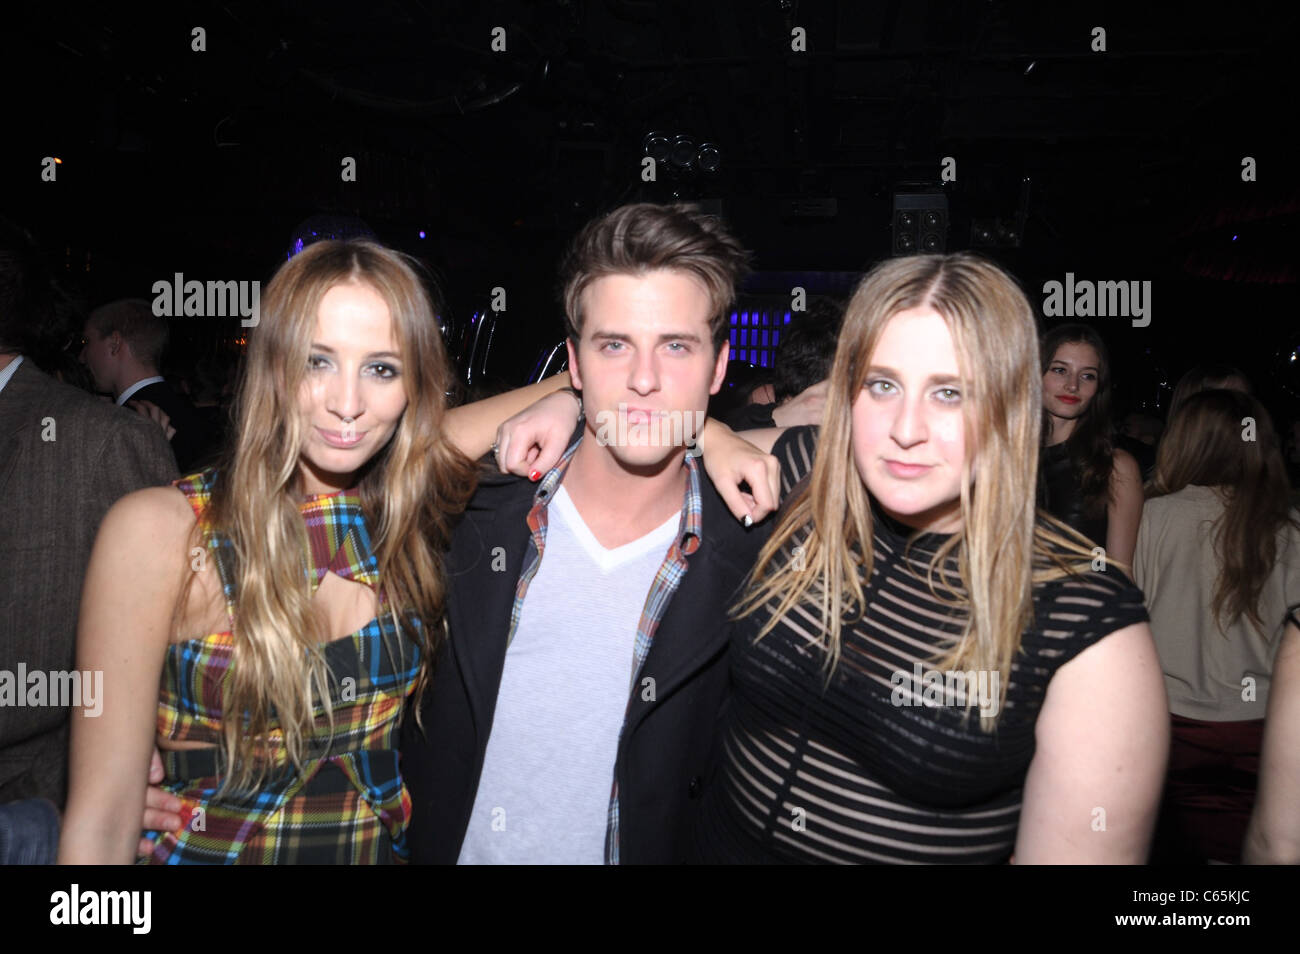 DJ Harley Viera-Newton ,Jared Followill, DJ Cassie Coane in attendance for EXCLUSIVE!!! Harley Viera-Newton & Cassie Coane 23rd Birthdays Party, LAVO nightclub, New York, NY February 16, 2011. Photo By: Rob Rich/Everett Collection Stock Photo